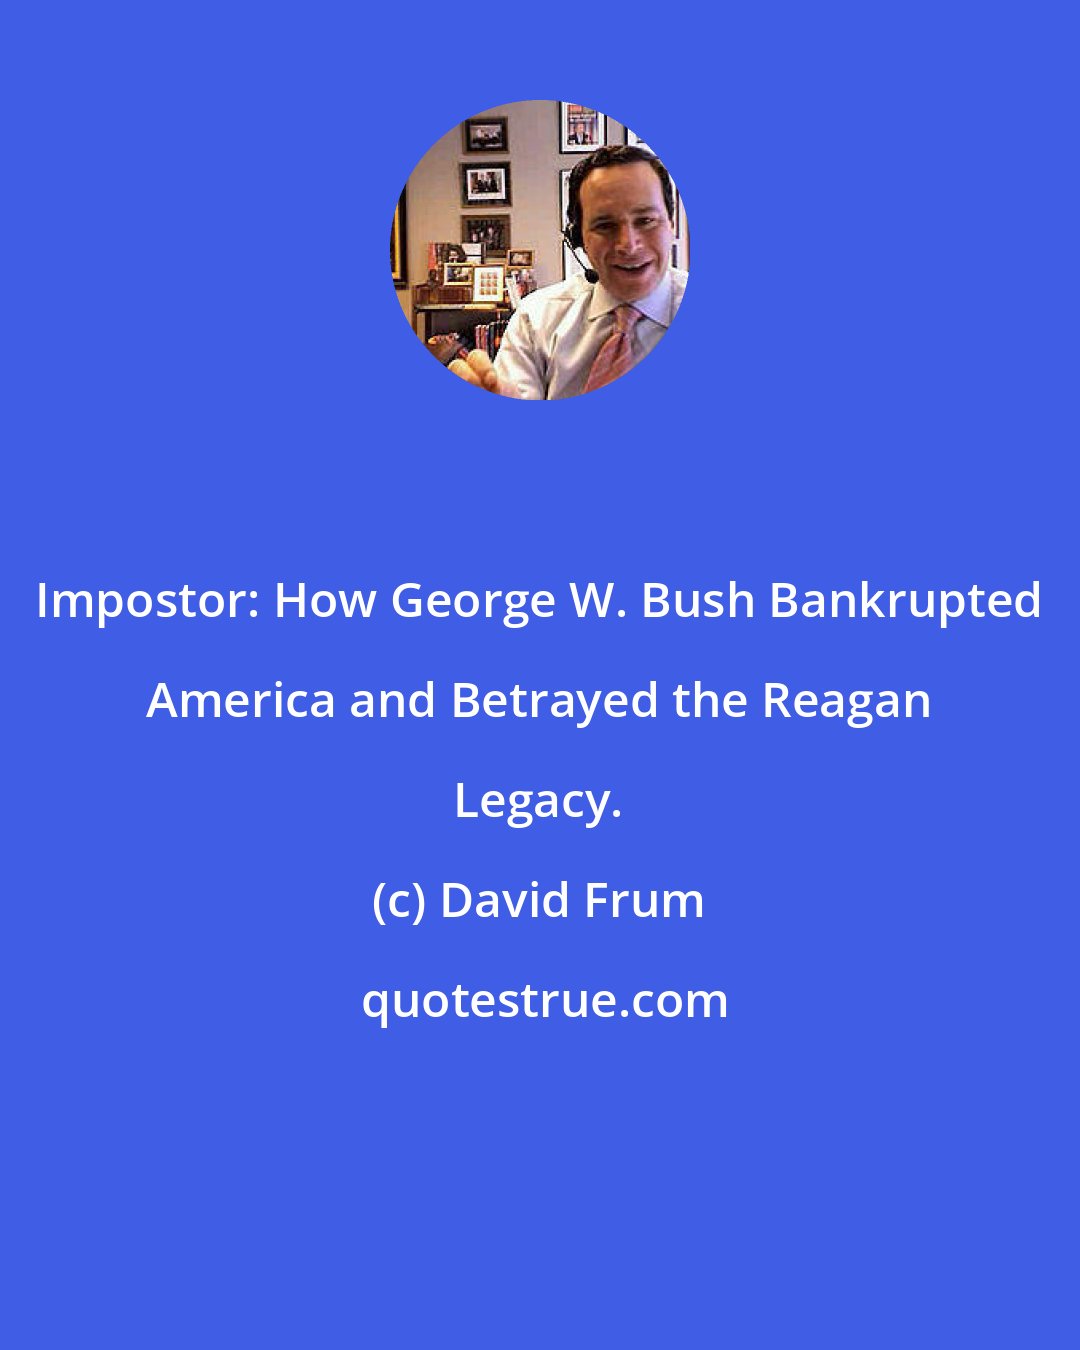 David Frum: Impostor: How George W. Bush Bankrupted America and Betrayed the Reagan Legacy.